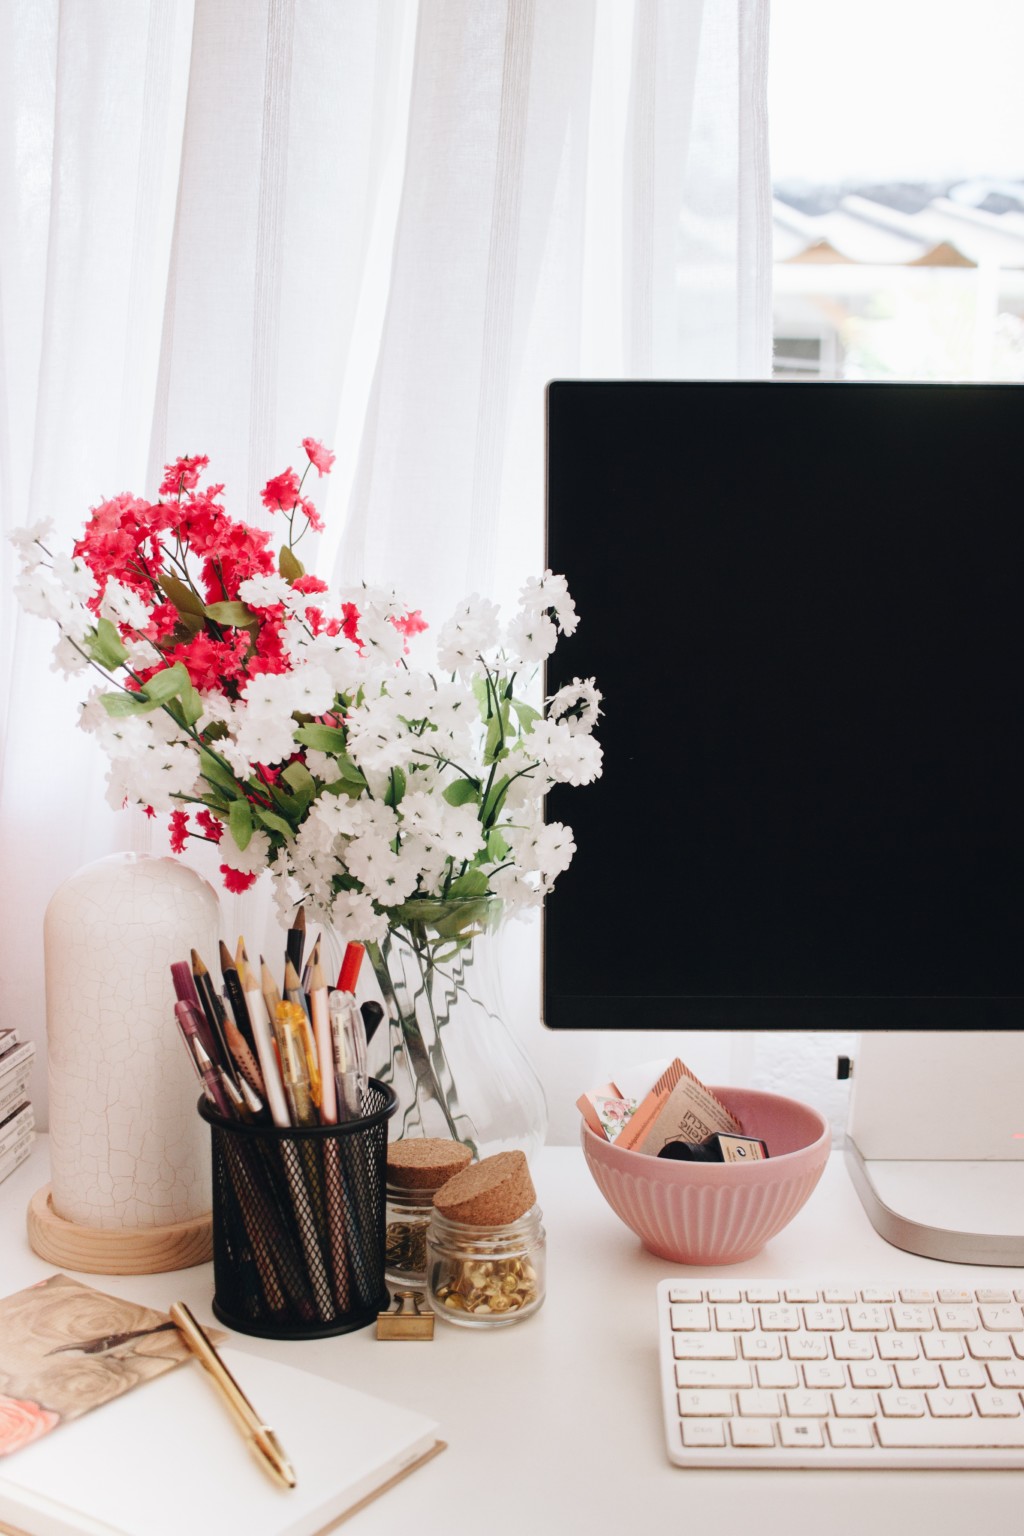 What Nobody Told Me About Working From Home Miami Moms Blog